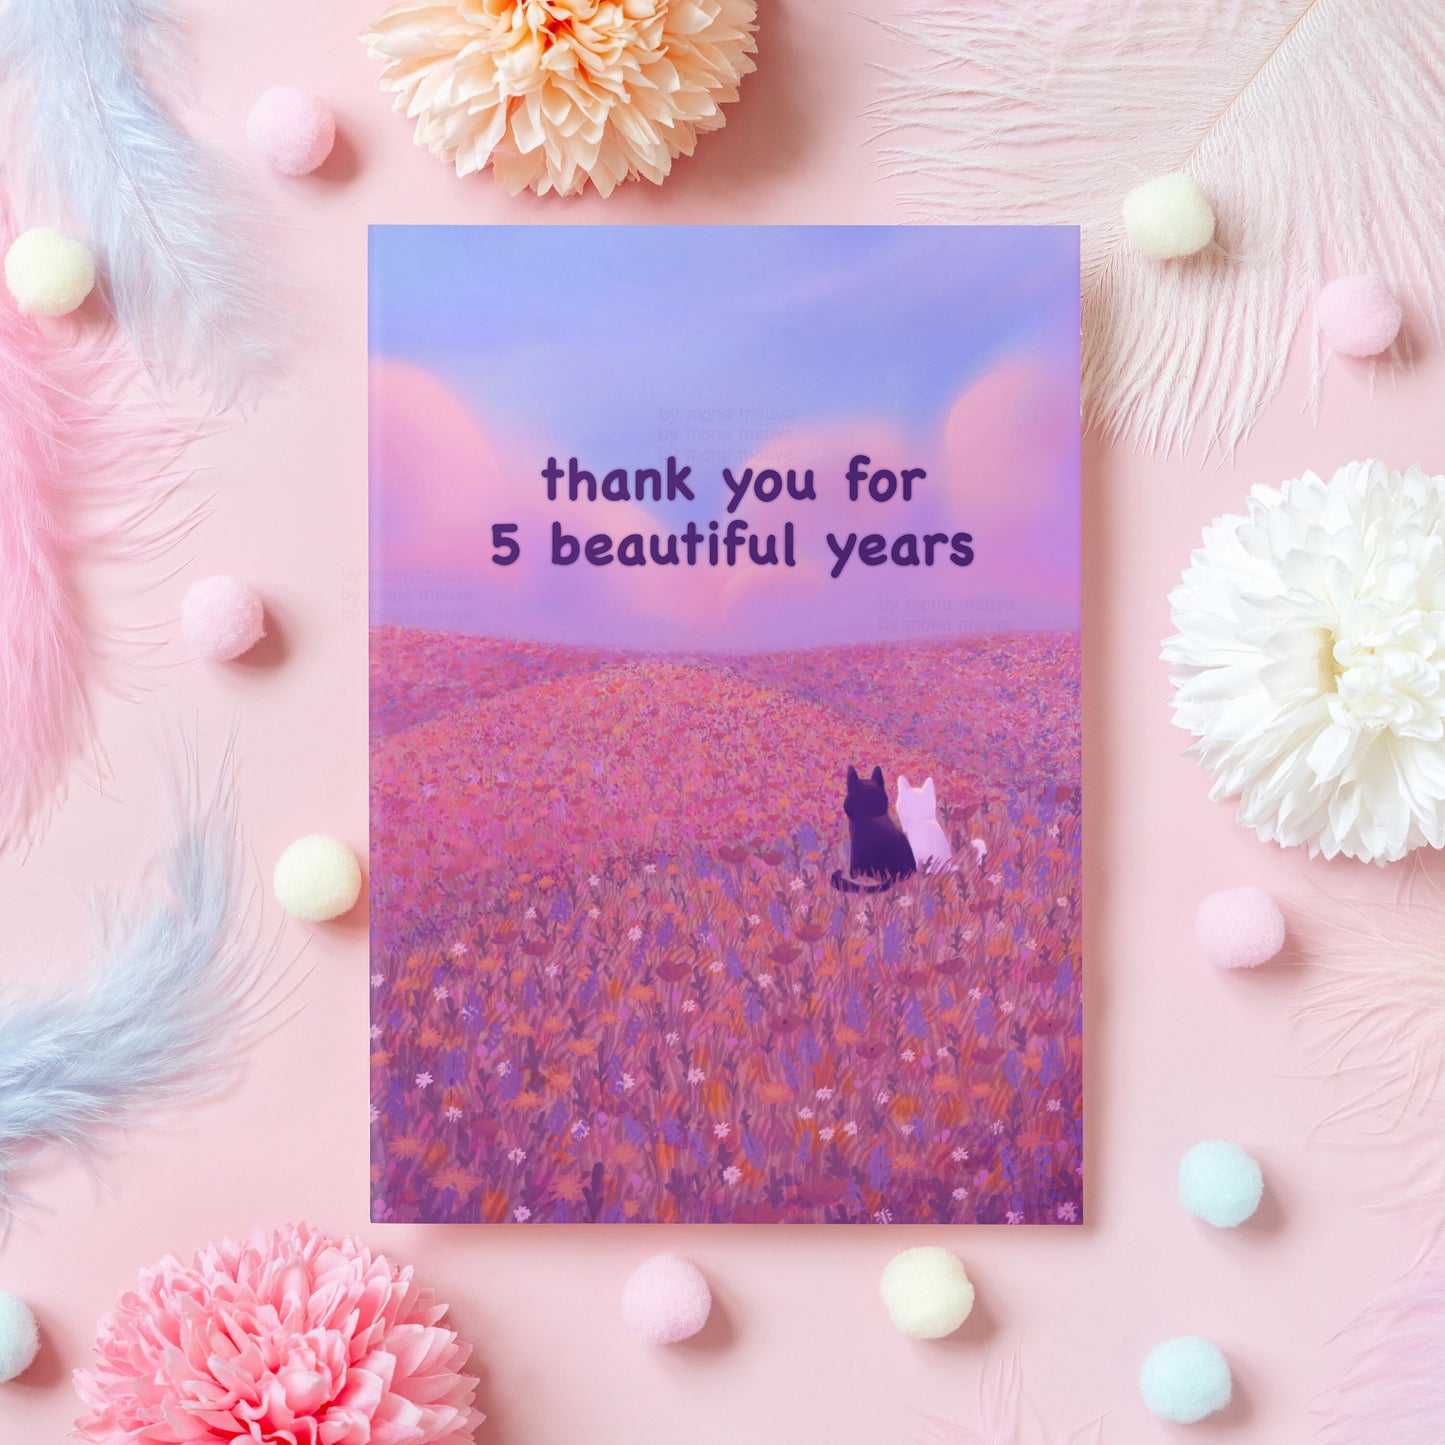 Cute Fifth Anniversary Card | Thank You for 5 Beautiful Years | Heartfelt Gift for Husband, Wife, Boyfriend, Girlfriend - Her or Him